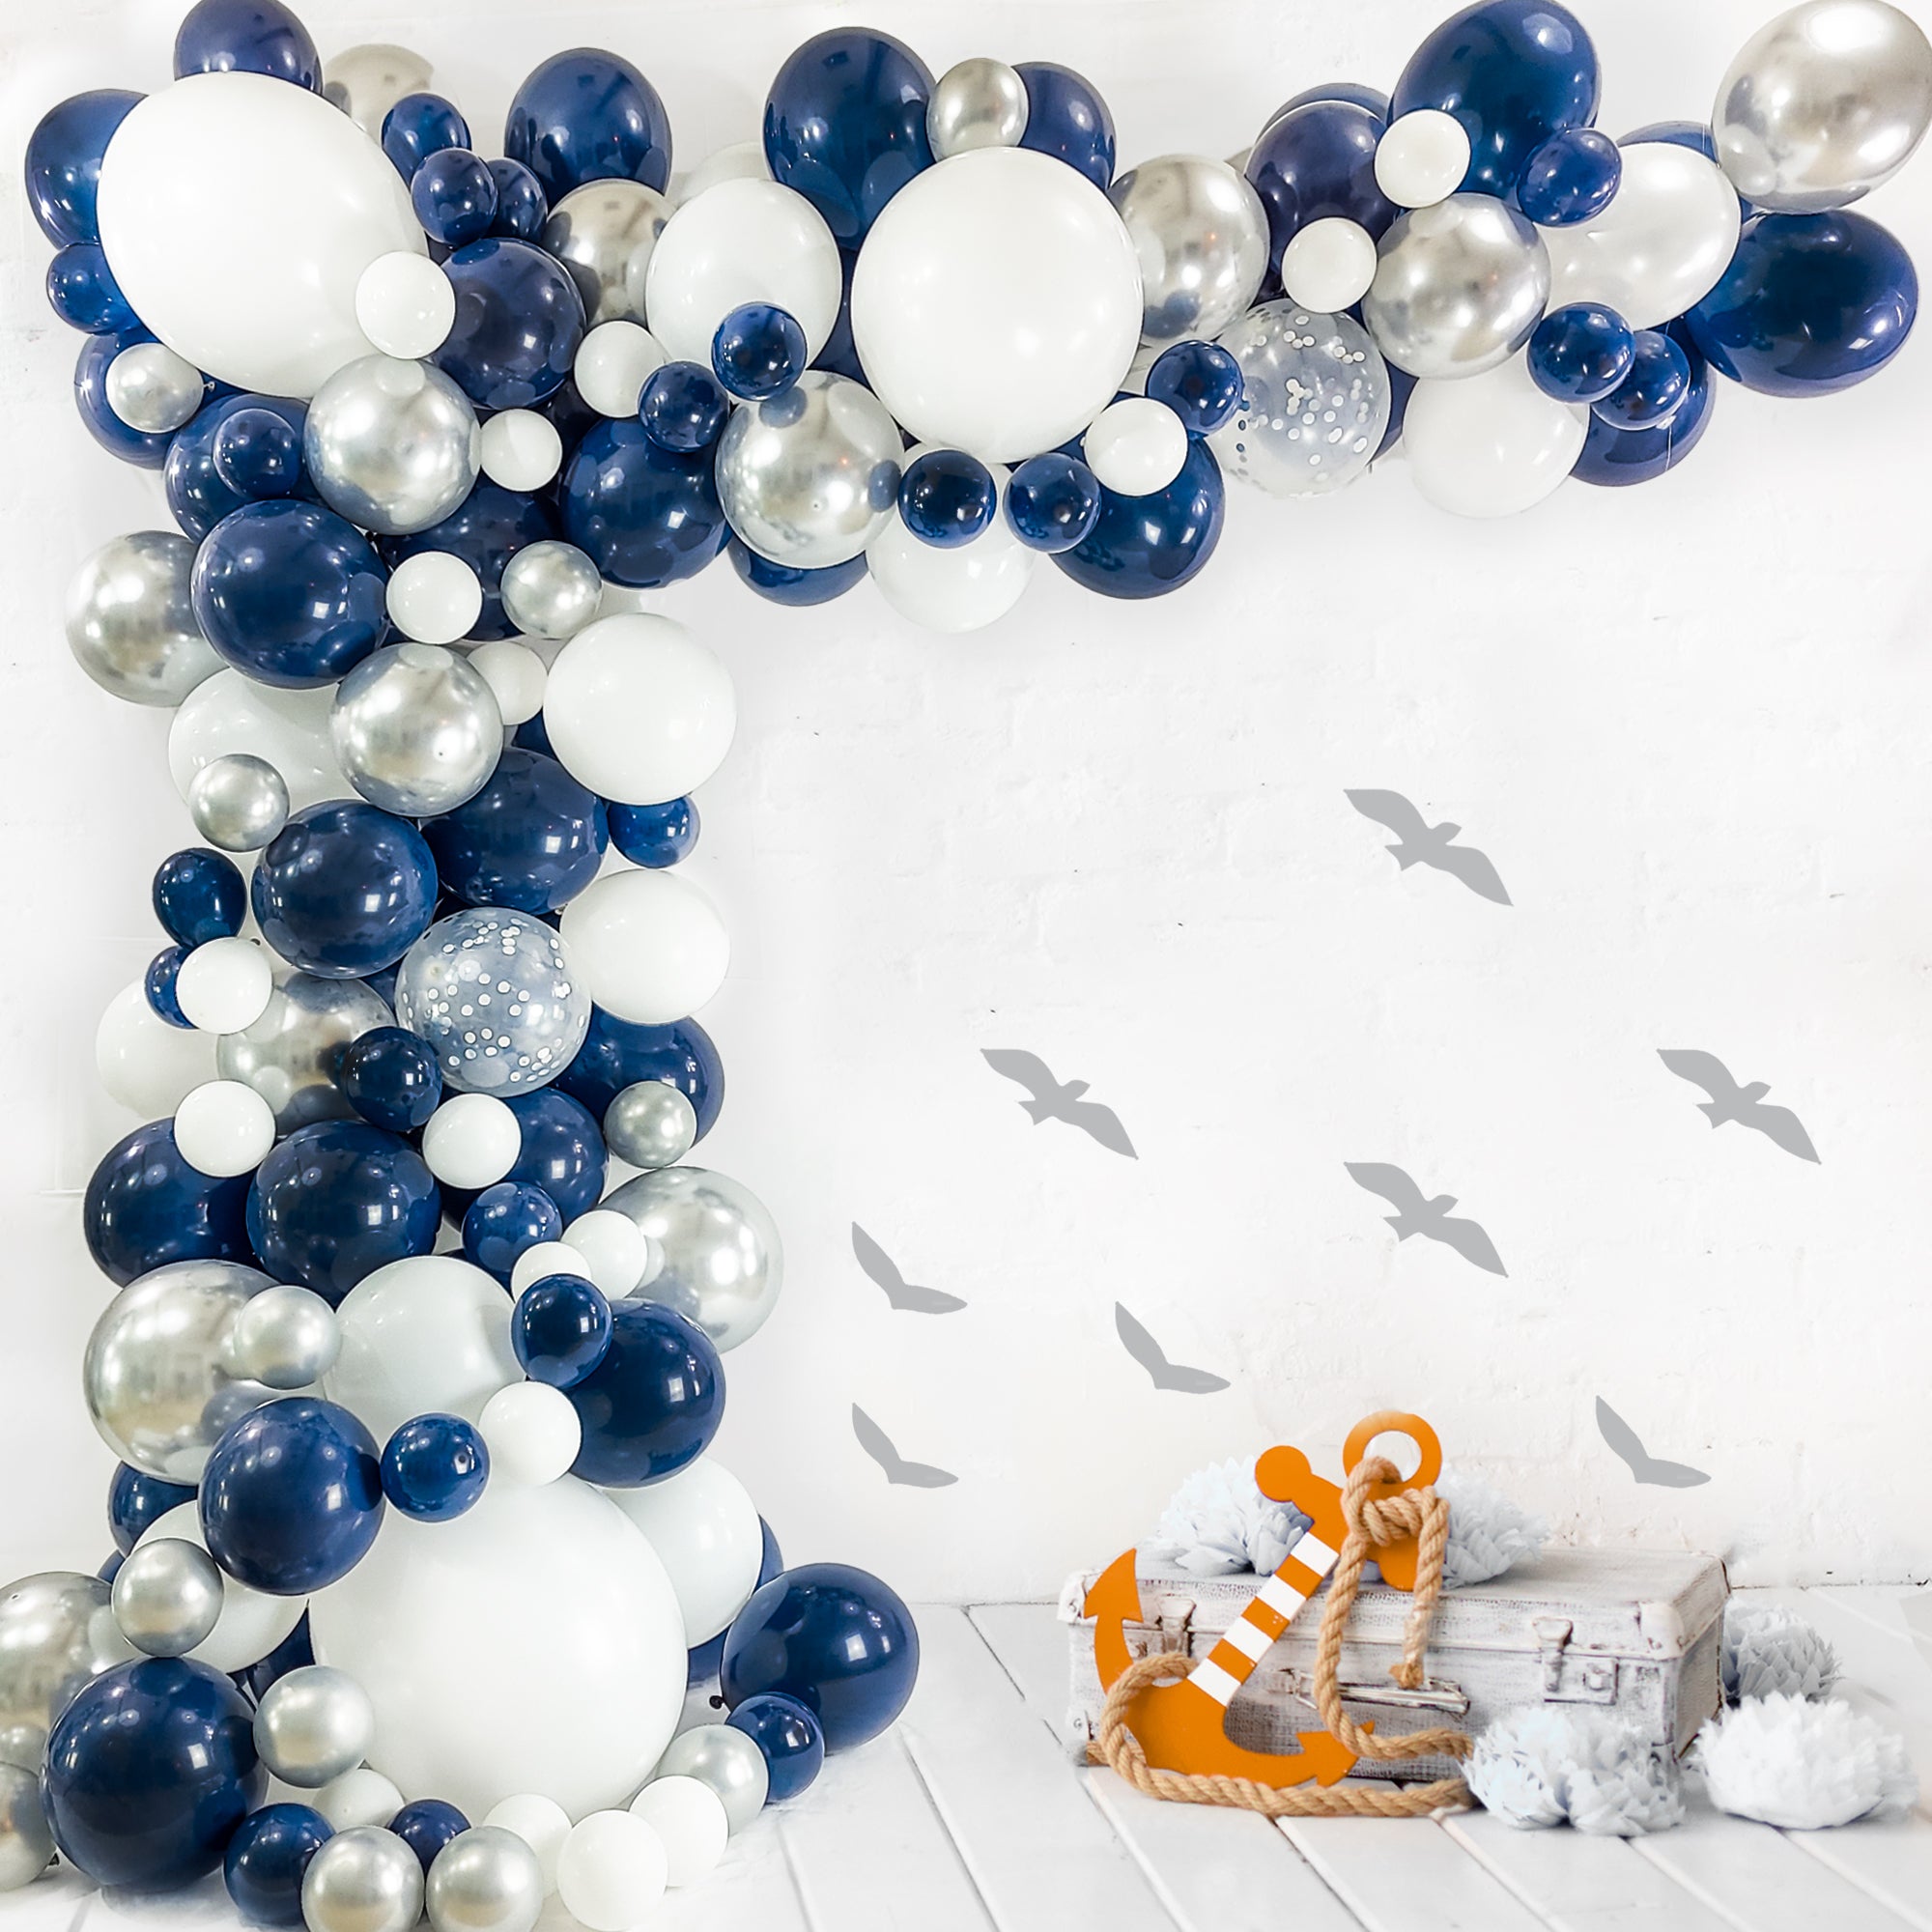 Balloonify Balloon Garland Set, 1 Durable Balloon Decorations Kit - 106  Pieces, With Balloon Chain, Navy & Sky Blue Latex Balloons for Arches,  Includes Glue Dots, - Restaurantware